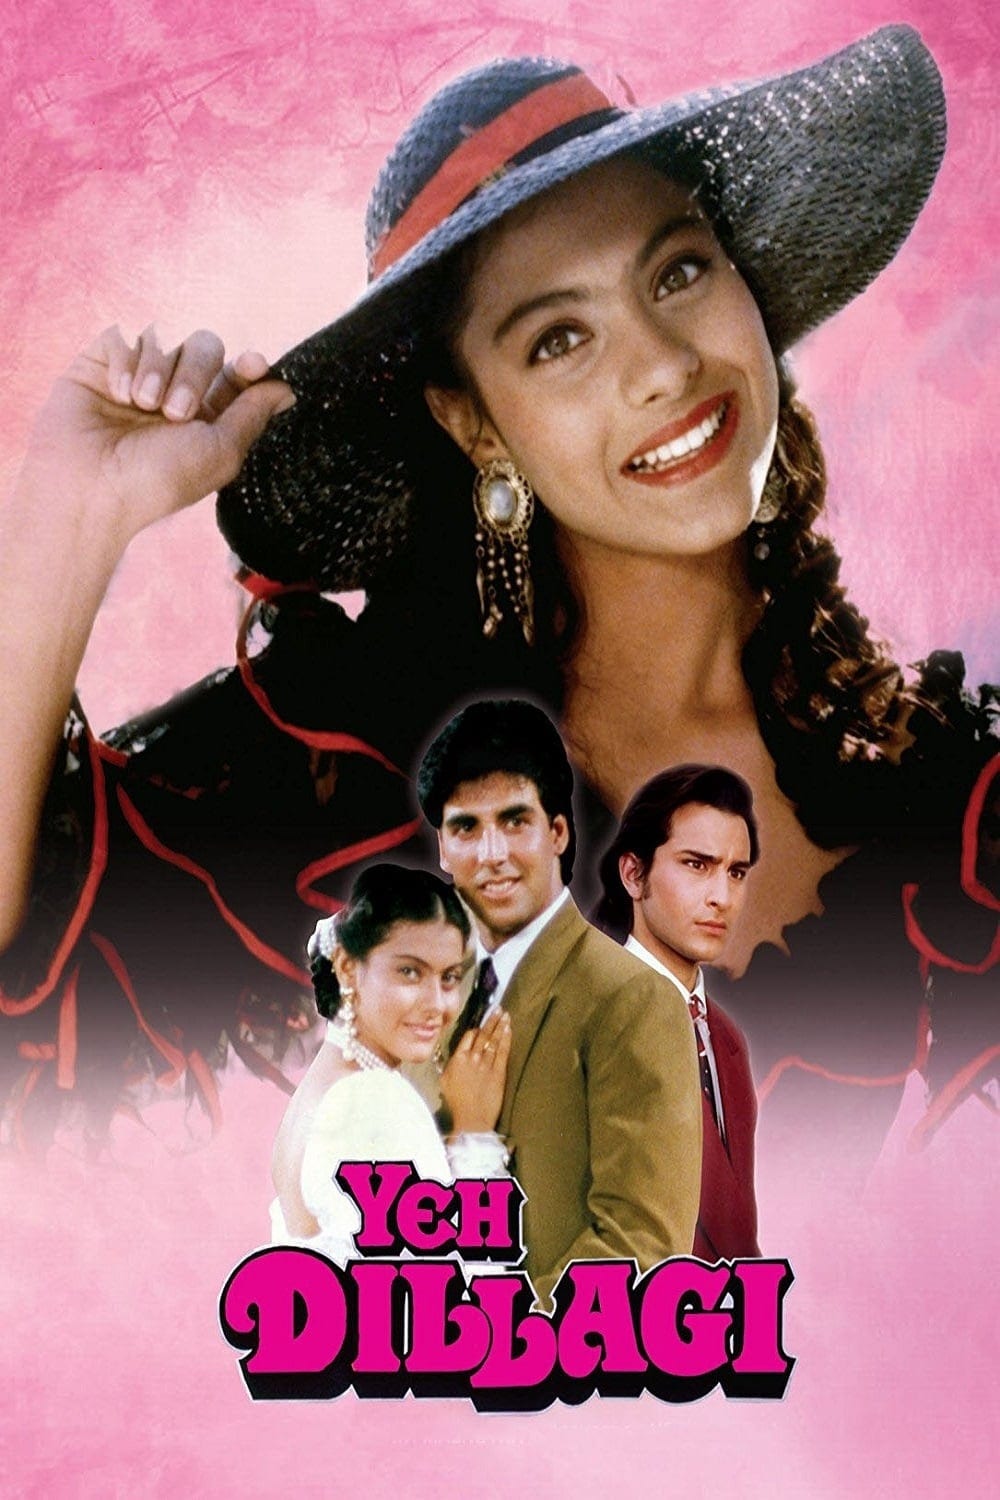 Poster for the movie "Yeh Dillagi"